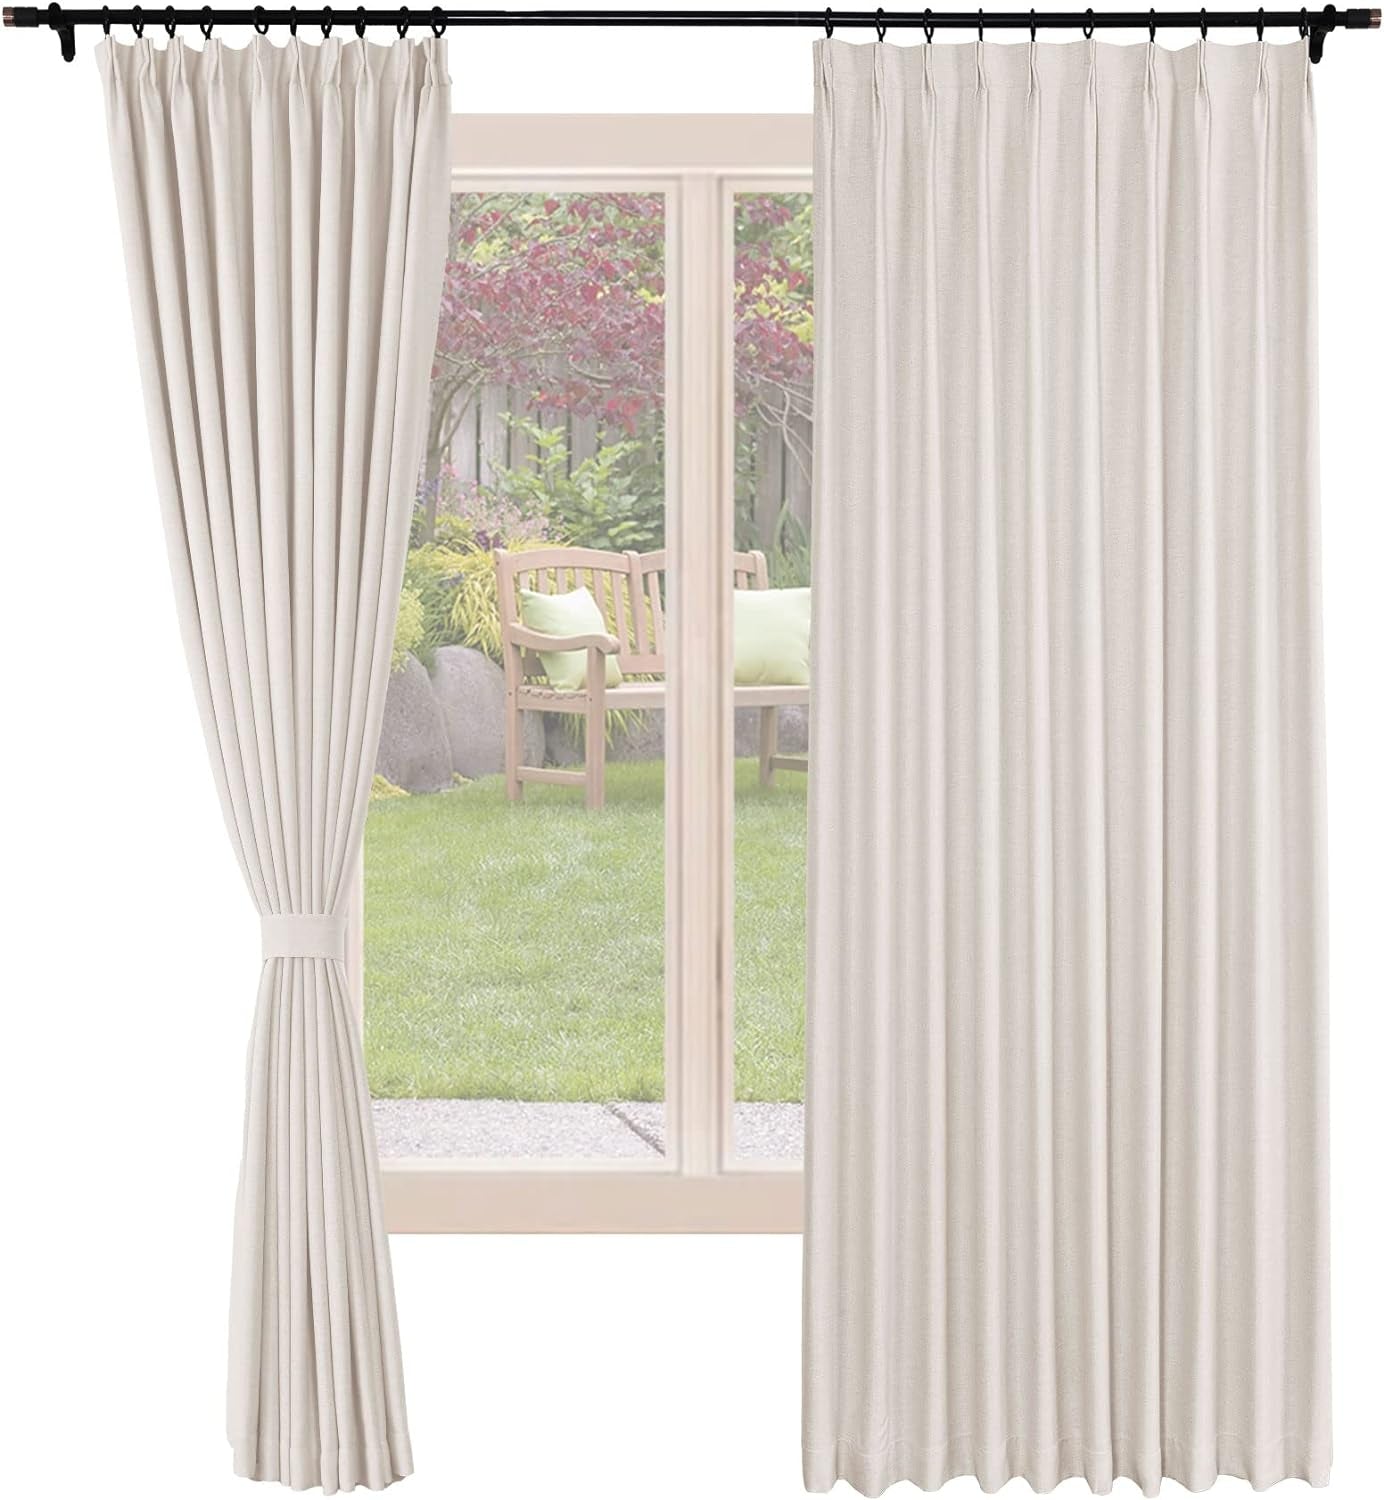 Frelement Blackout Curtains Natural Linen Curtains Pinch Pleat Drapery Panels for Living Room Thermal Insulated Curtains, 52" W X 63" L, 2 Panels, Oasis  Frelement 01 Ivory White (52Wx84L Inch)*2 